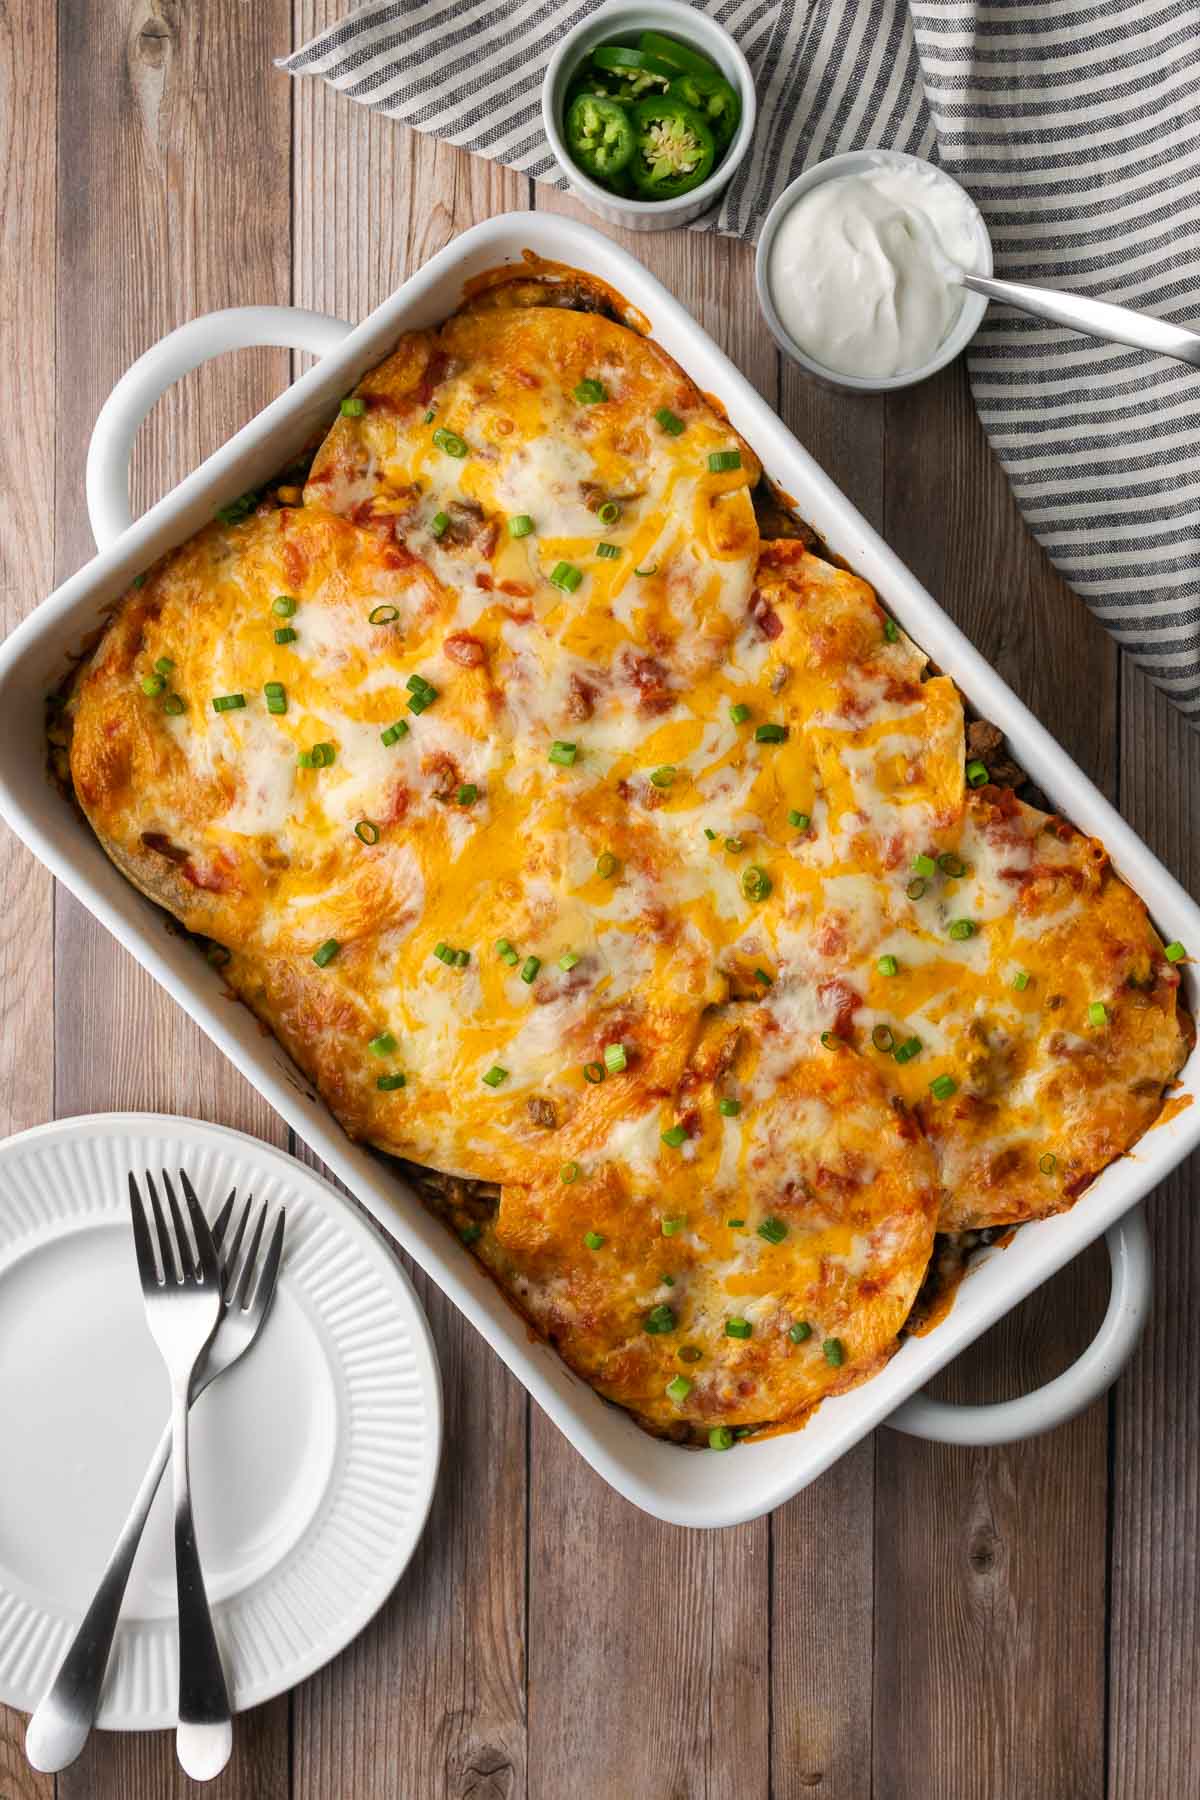 Baked tortilla lasagna in a white casserole dish, with bowls of sour cream and jalapenos on the side.